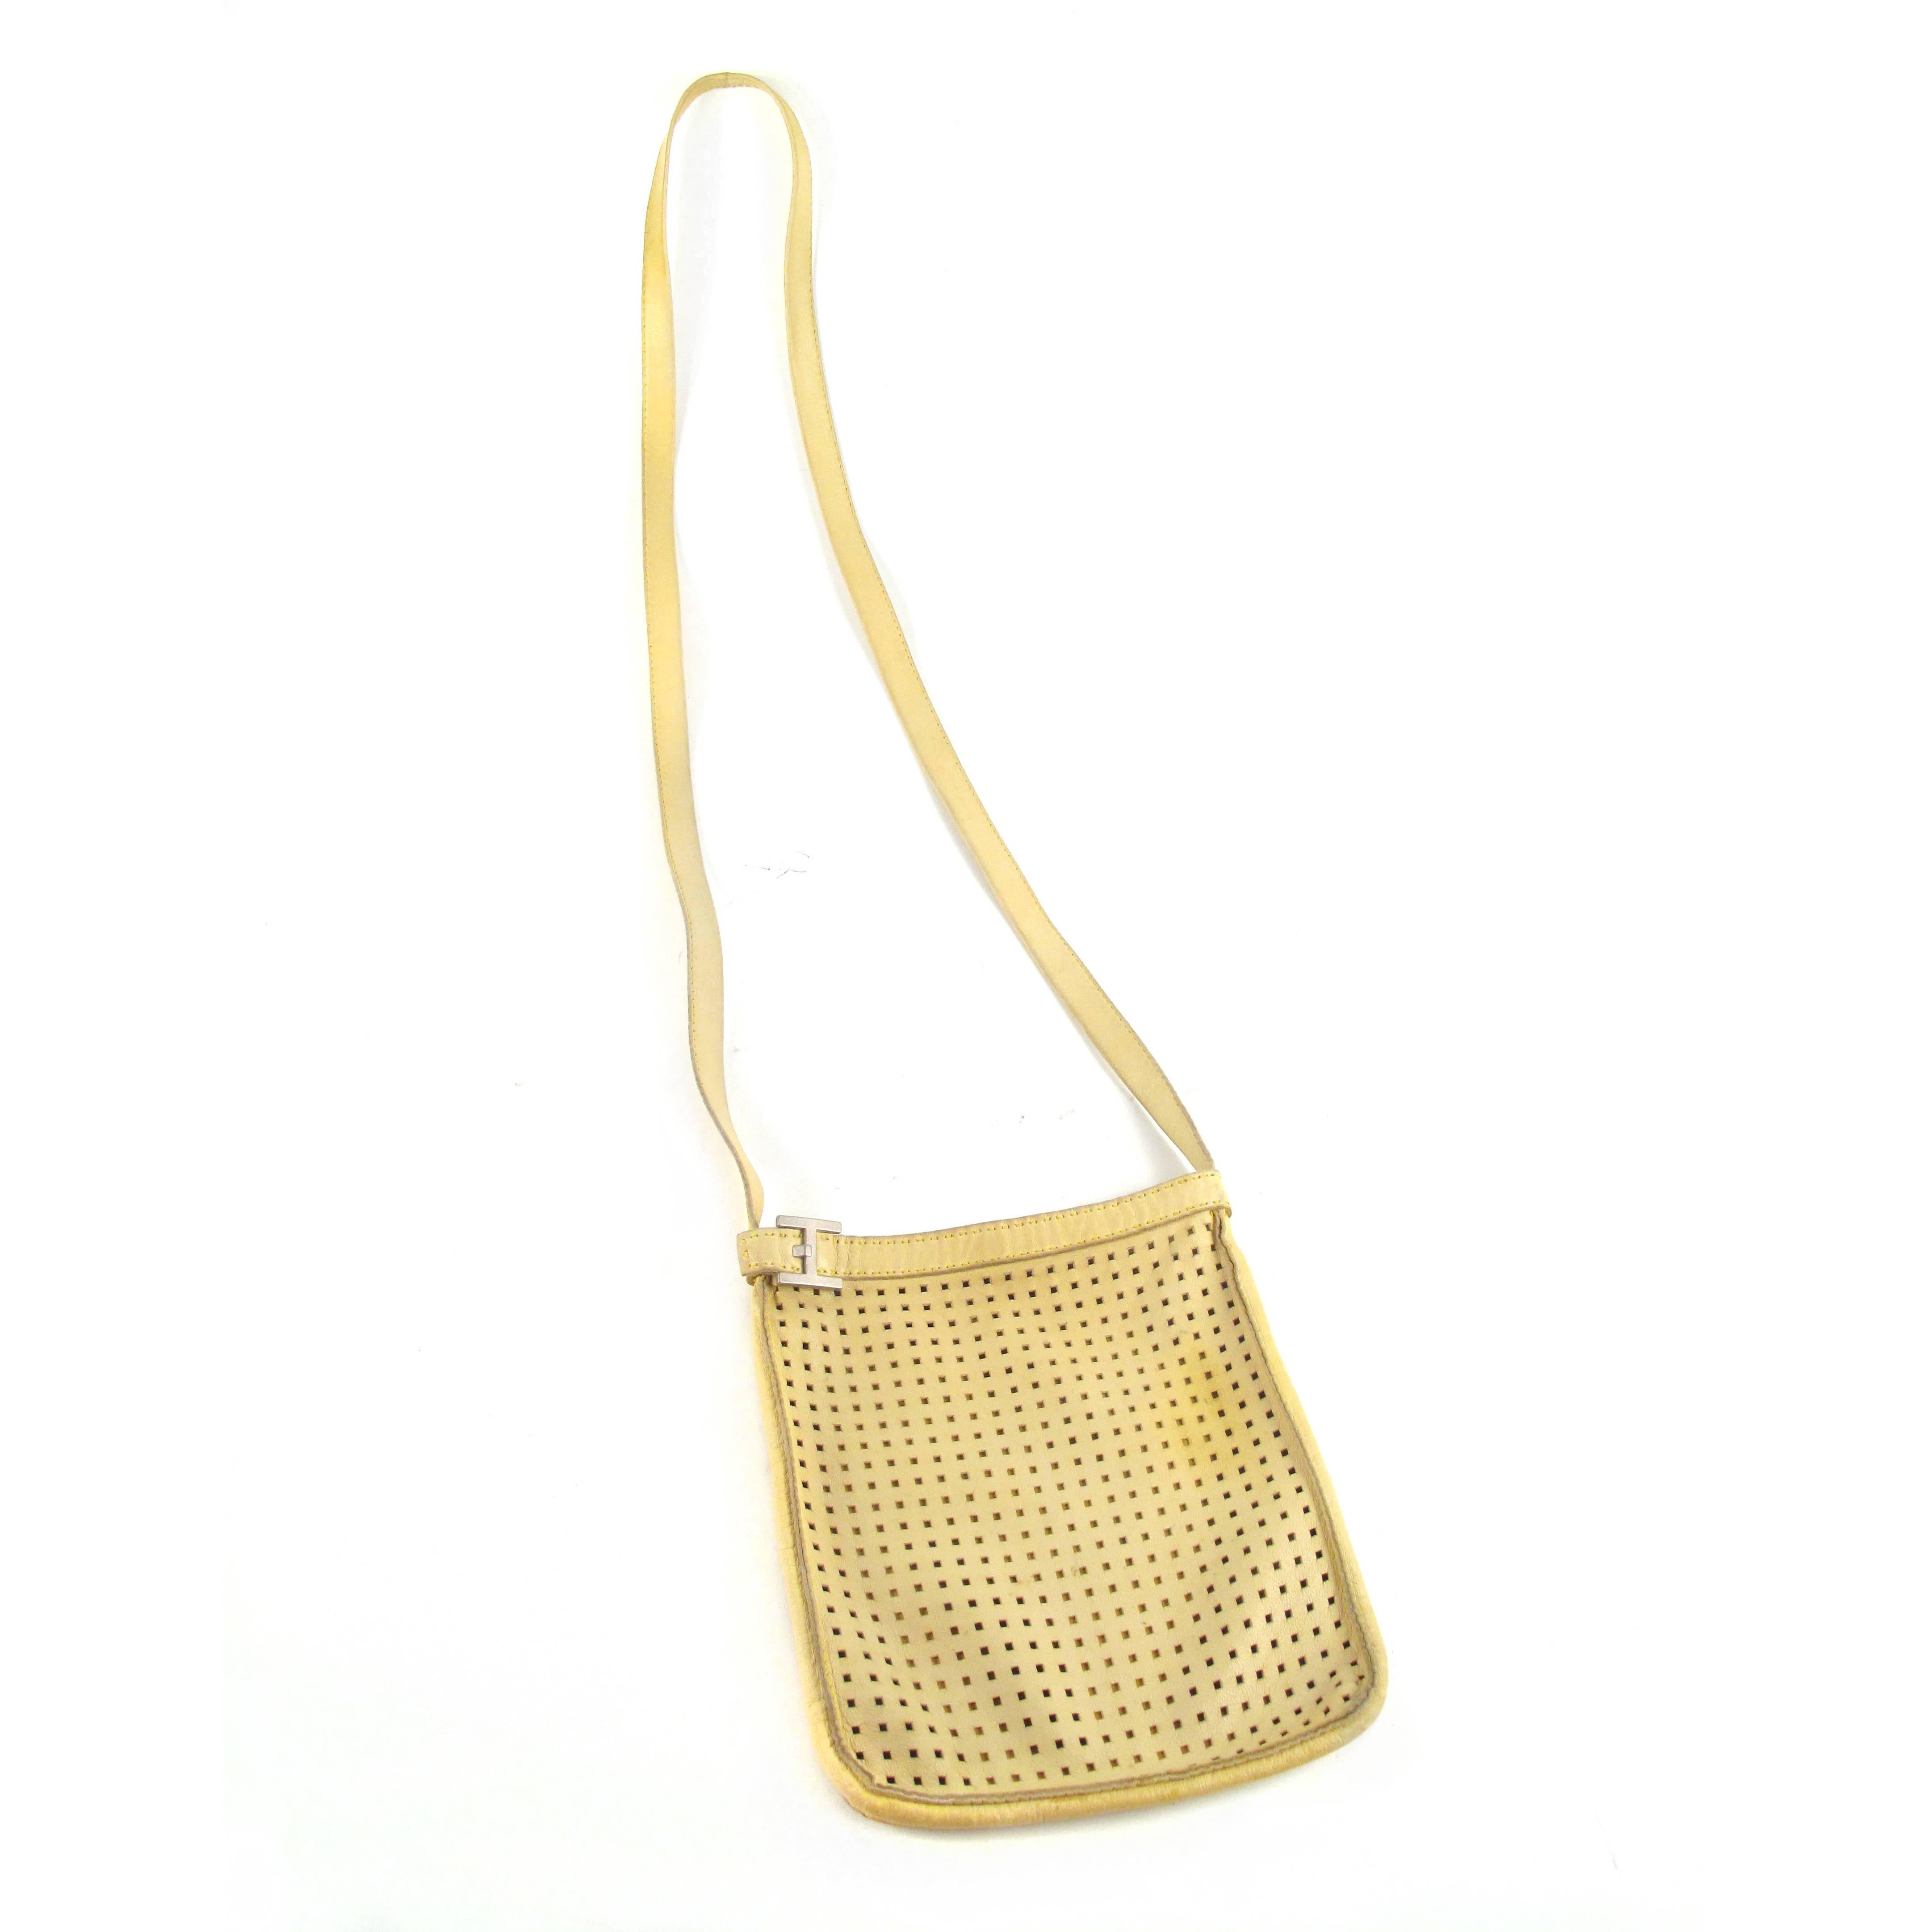 Hermes - Small Perforated Crossbody Bag

Color: Yellow

Material: Leather

------------------------------------------------------------

Details:

- silver tone hardware

- perforated leather at front

- includes hermes box

- item #